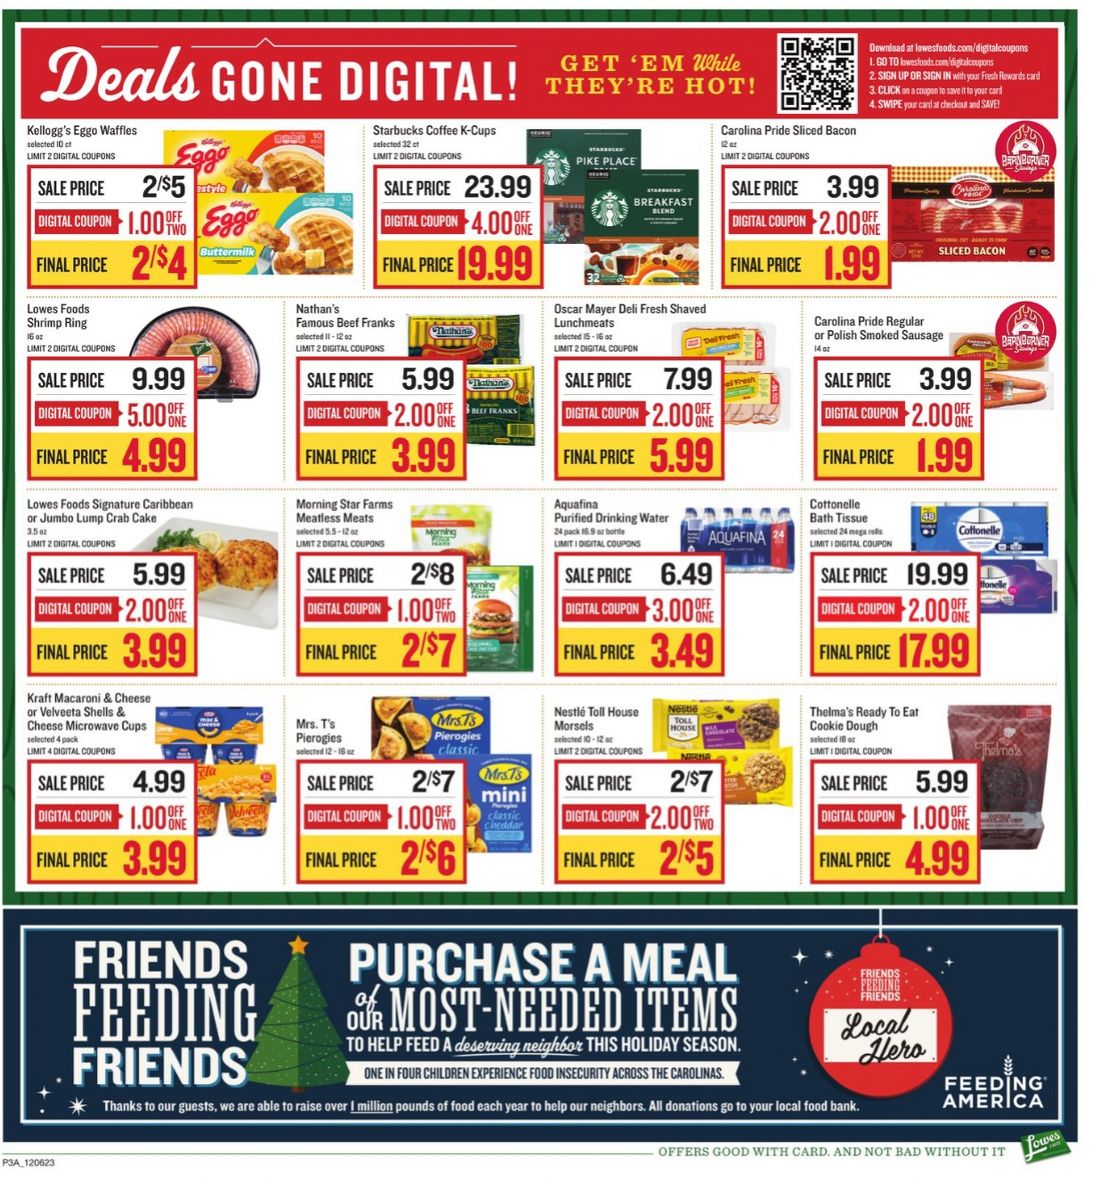 July 2024 Weekly Sales, Deals, Discounts and Digital Coupons.